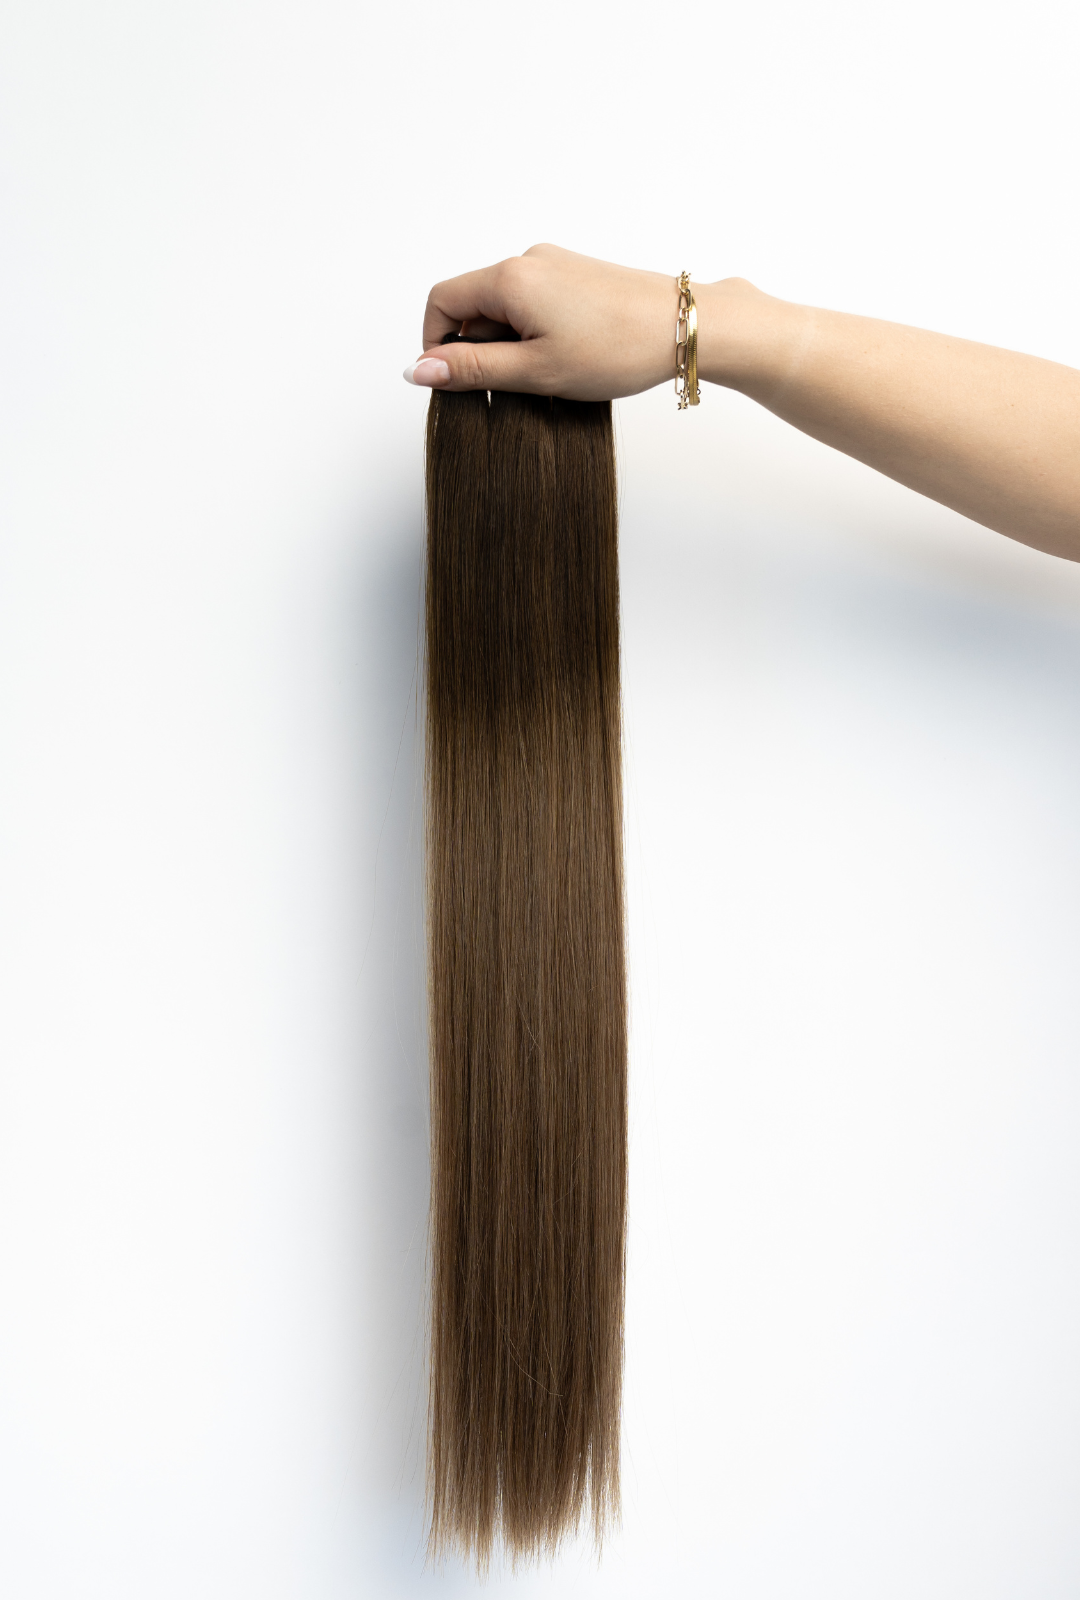 Laced Hair Keratin Bond Extensions Ombré #3/8 (Spiced Cider)